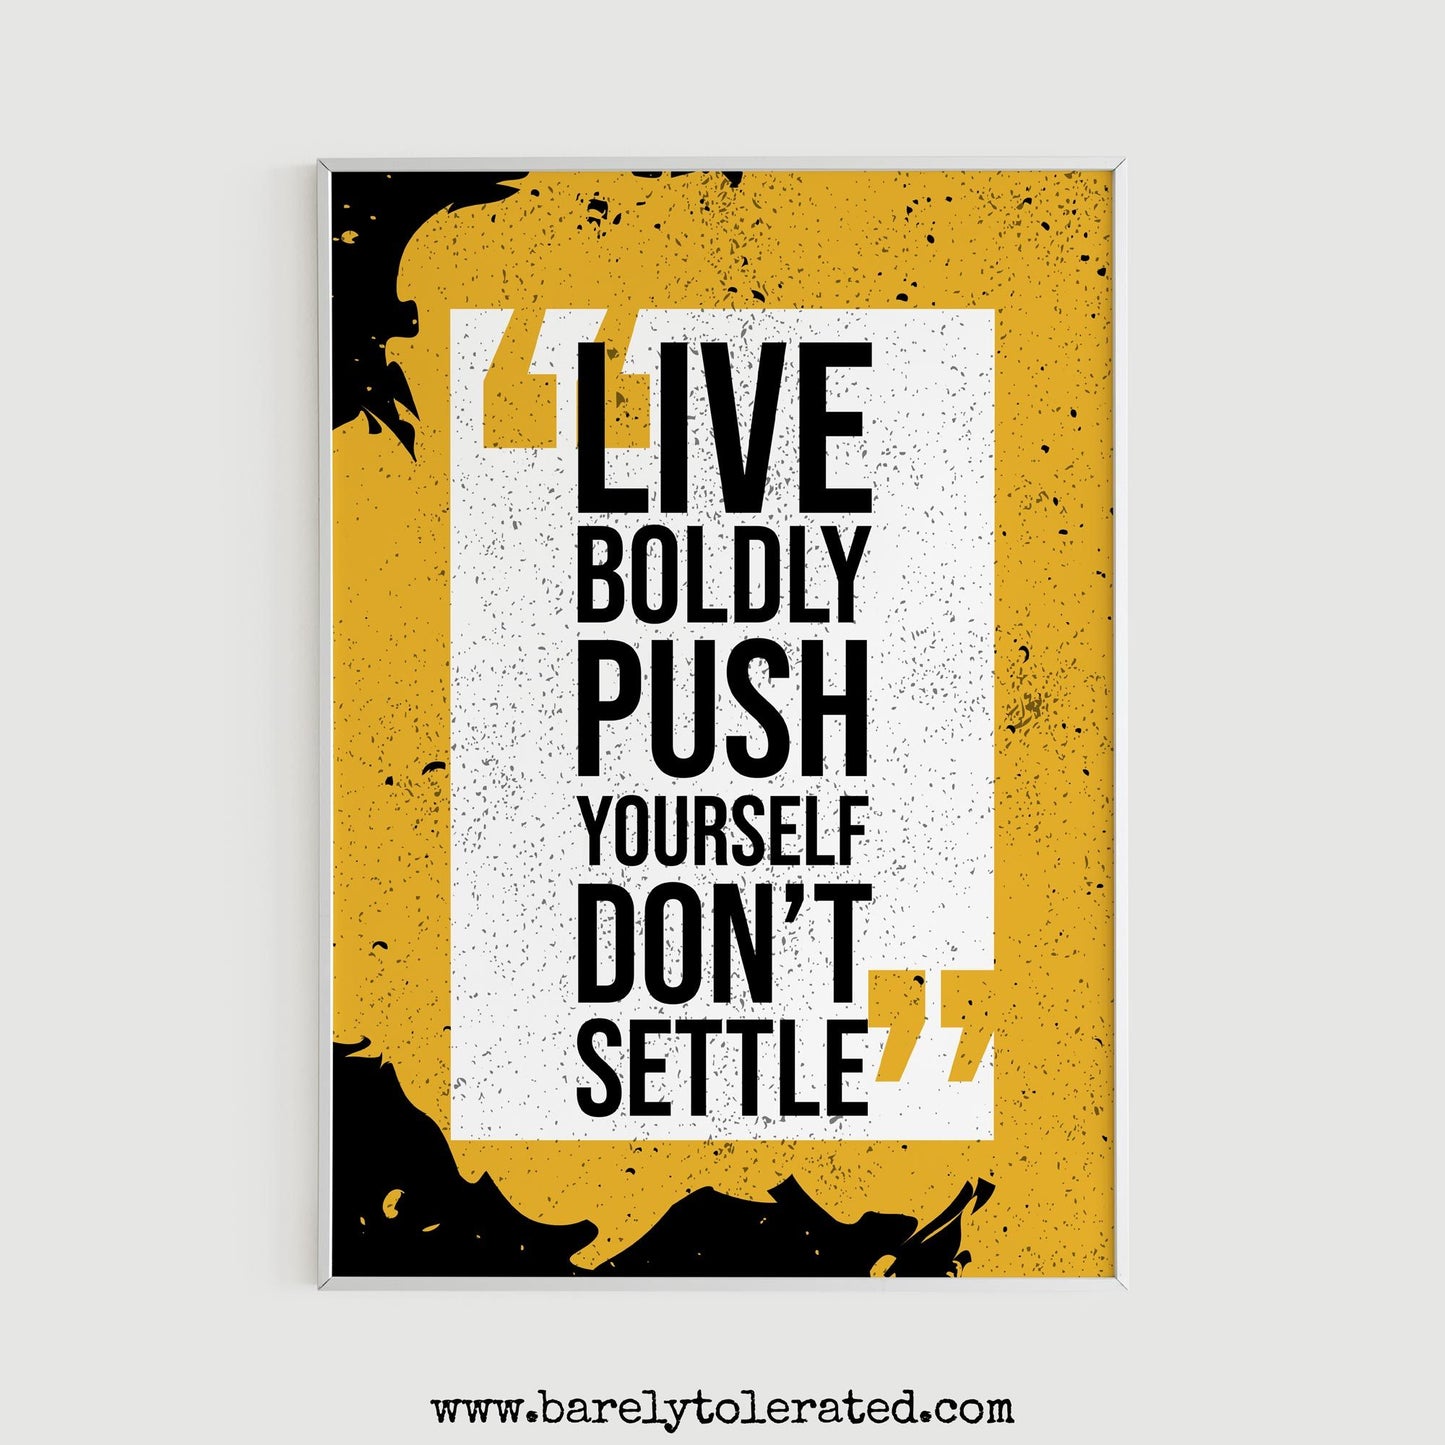 Live Boldly, Push Yourself, Don't Settle Print Image